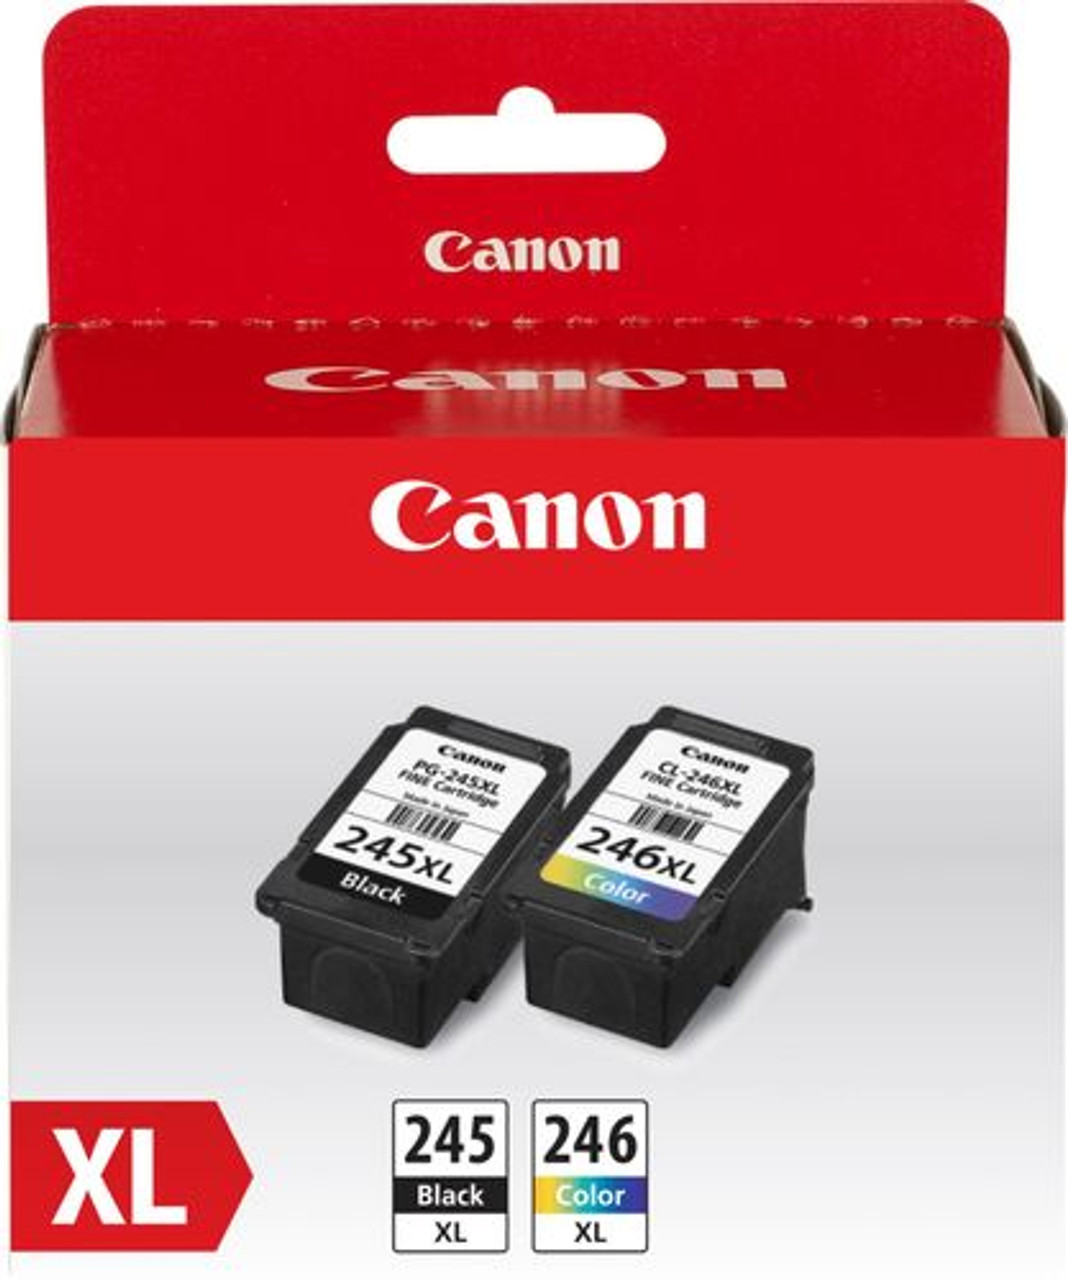 Canon - PG-245 XL / CL-246 XL 2-Pack High-Yield - Black/Color (Cyan, Magenta, Yellow) Ink Cartridges